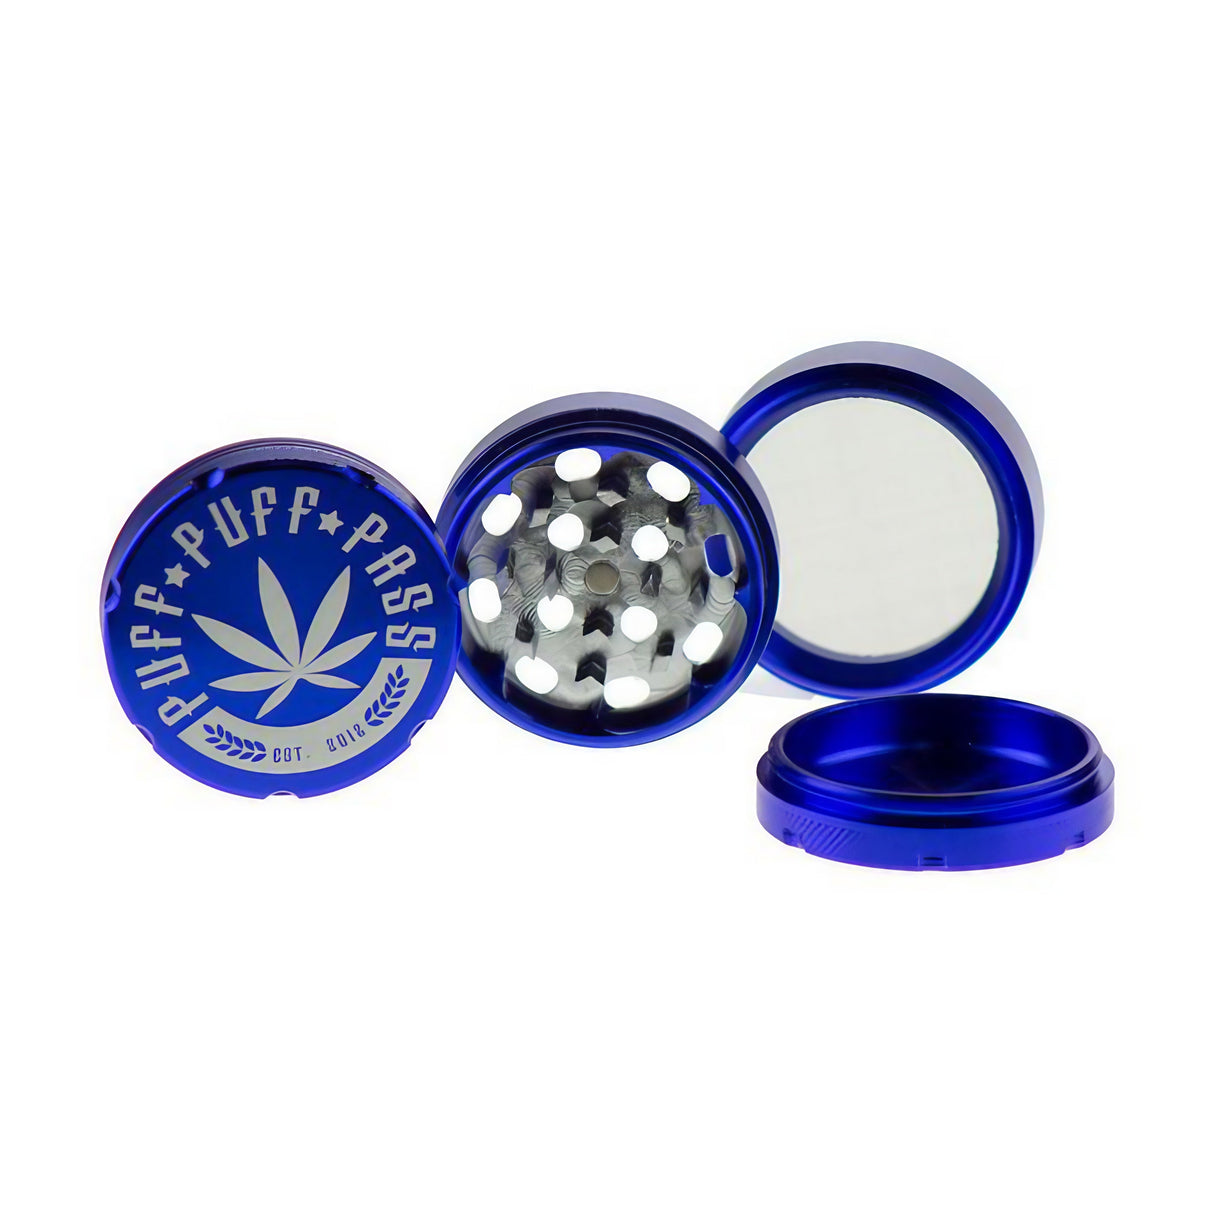 Puff Puff Pass 3 Stage 50mm Aluminum Grinder in Dark Blue, disassembled view showing all parts